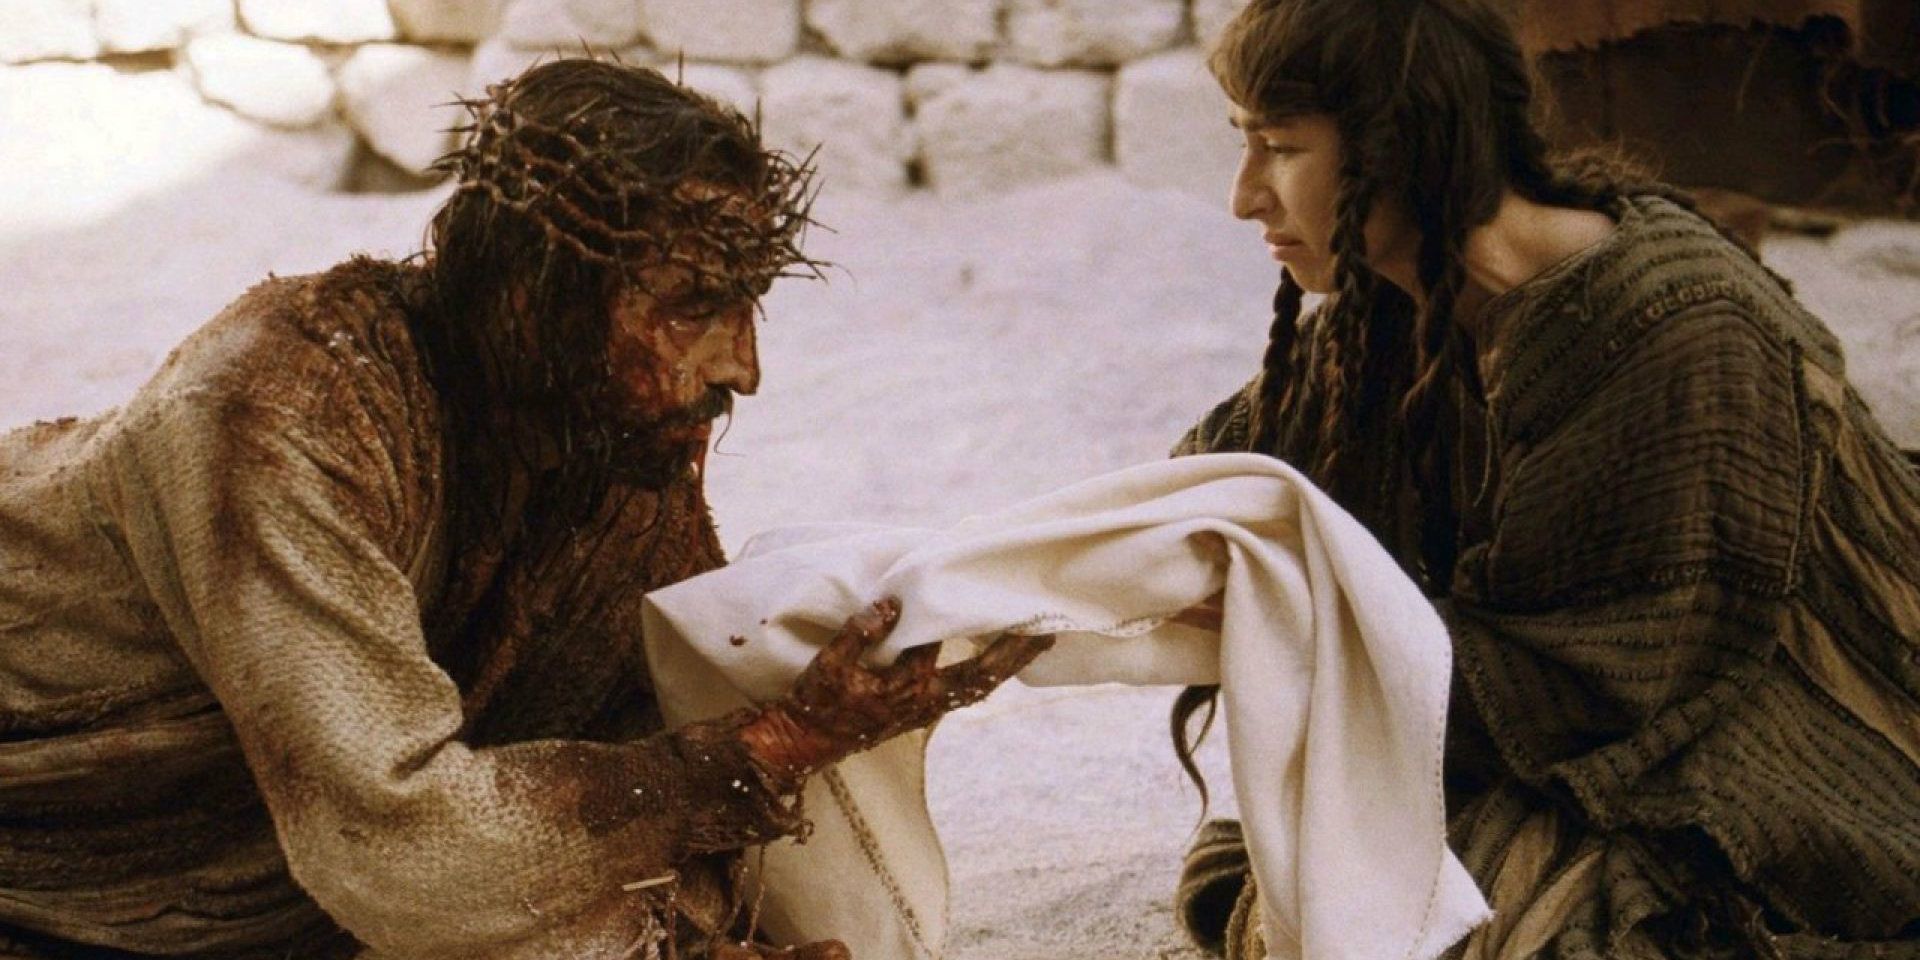 Jim Caviezel as Jesus in The Passion of the Christ